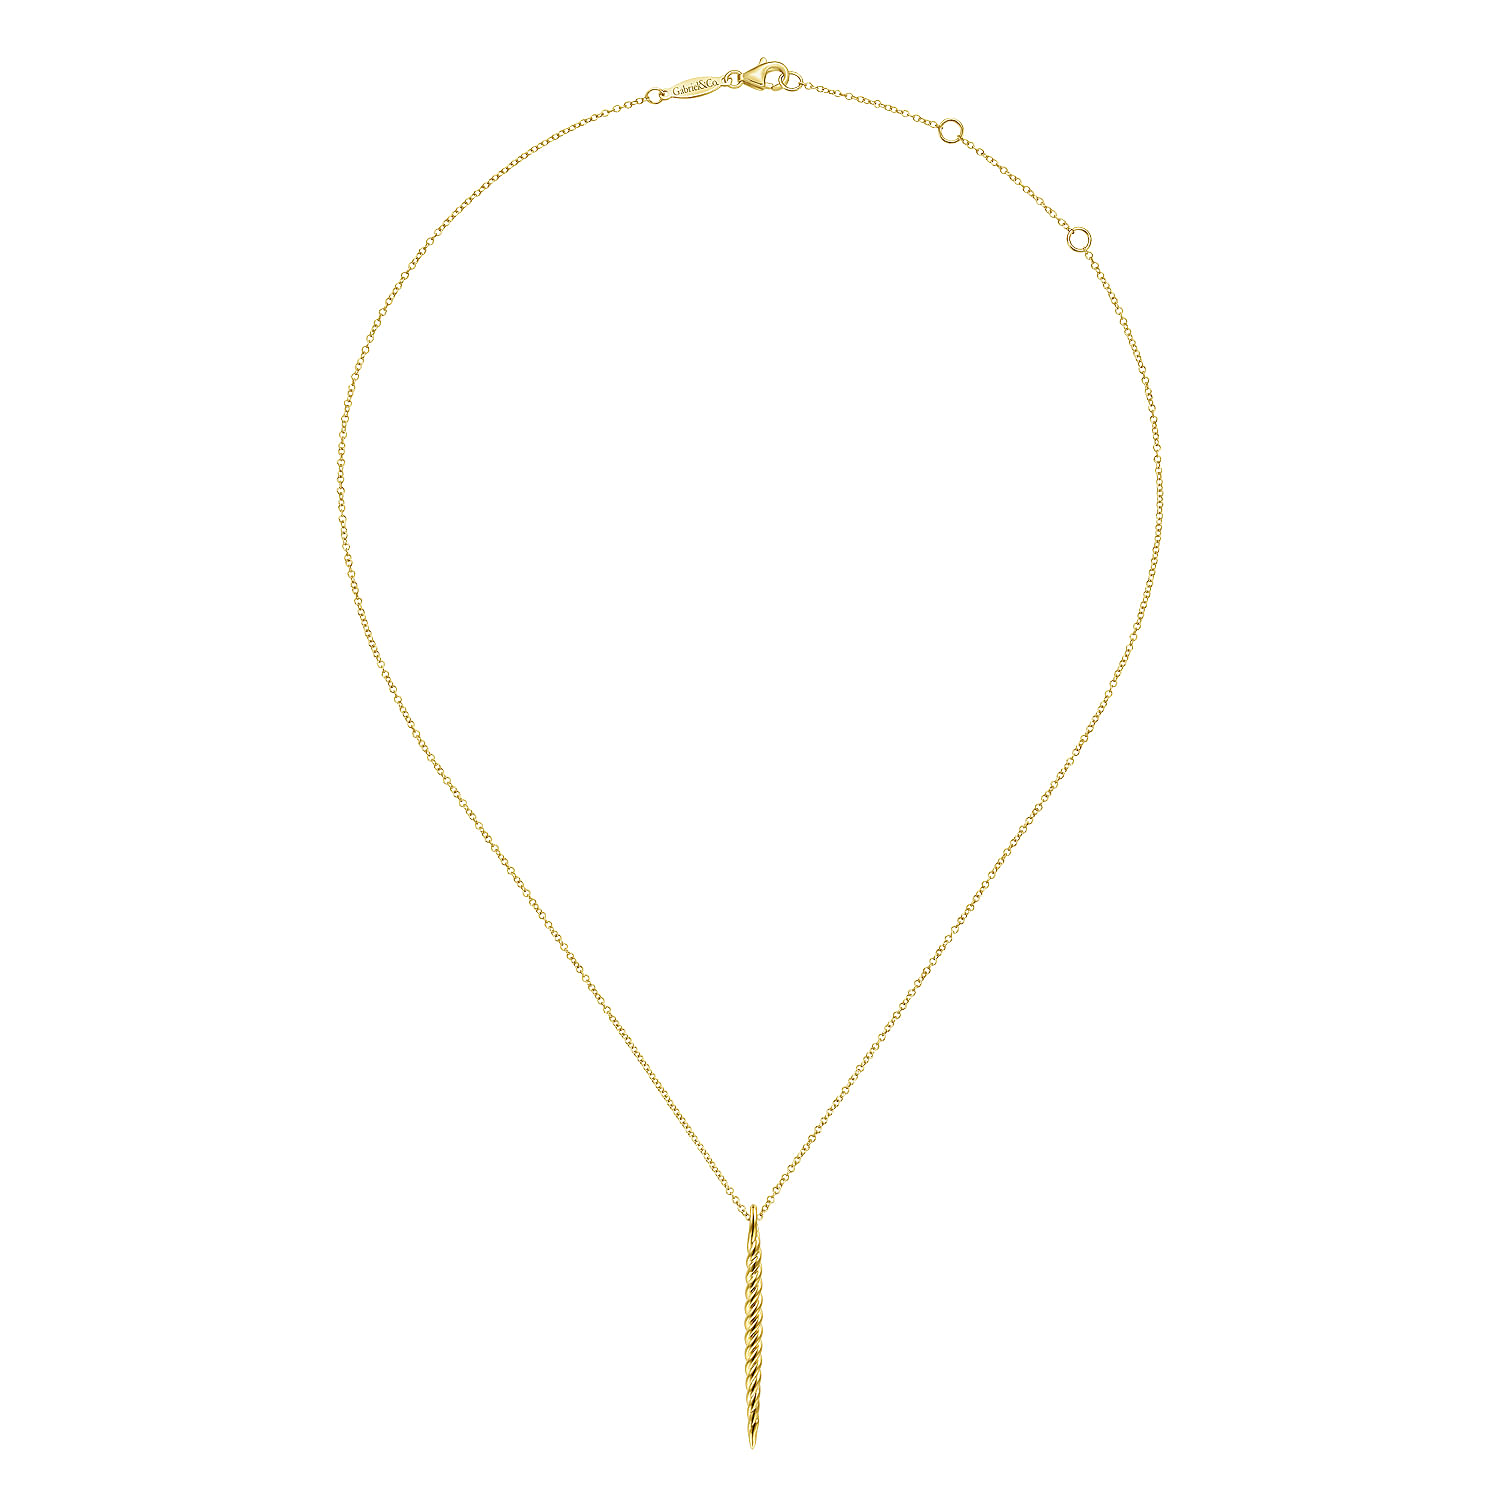 14K Yellow Gold Twisted Rope Spike Pendant Necklace